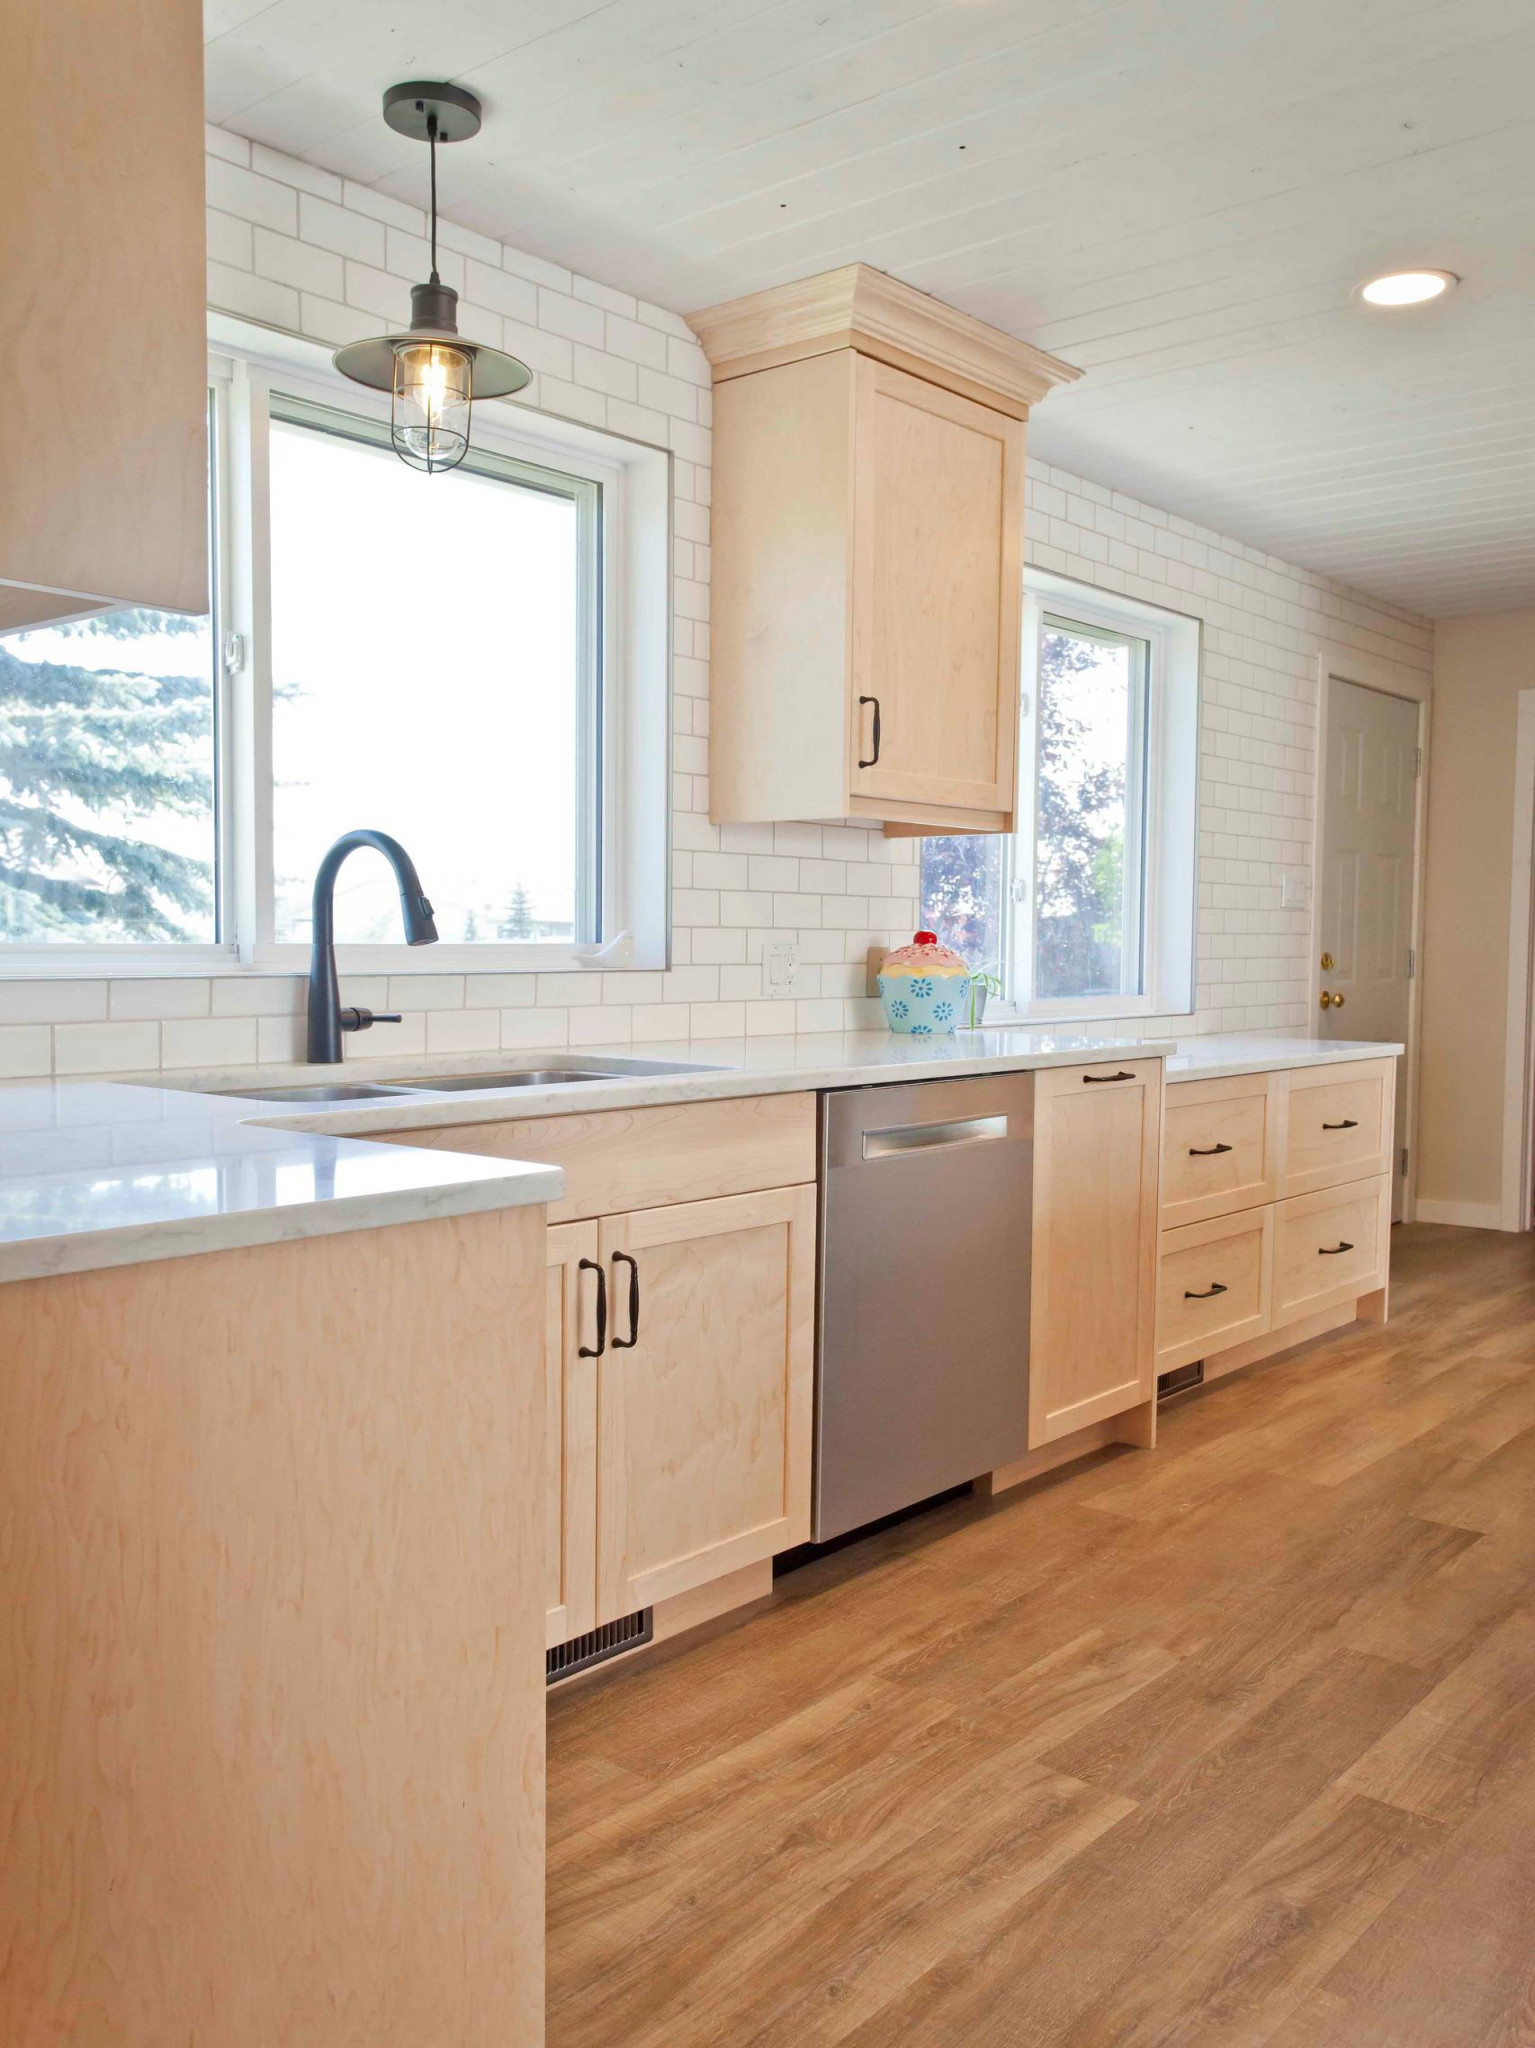 Natural Maple Cabinets - Photos & Ideas  Houzz